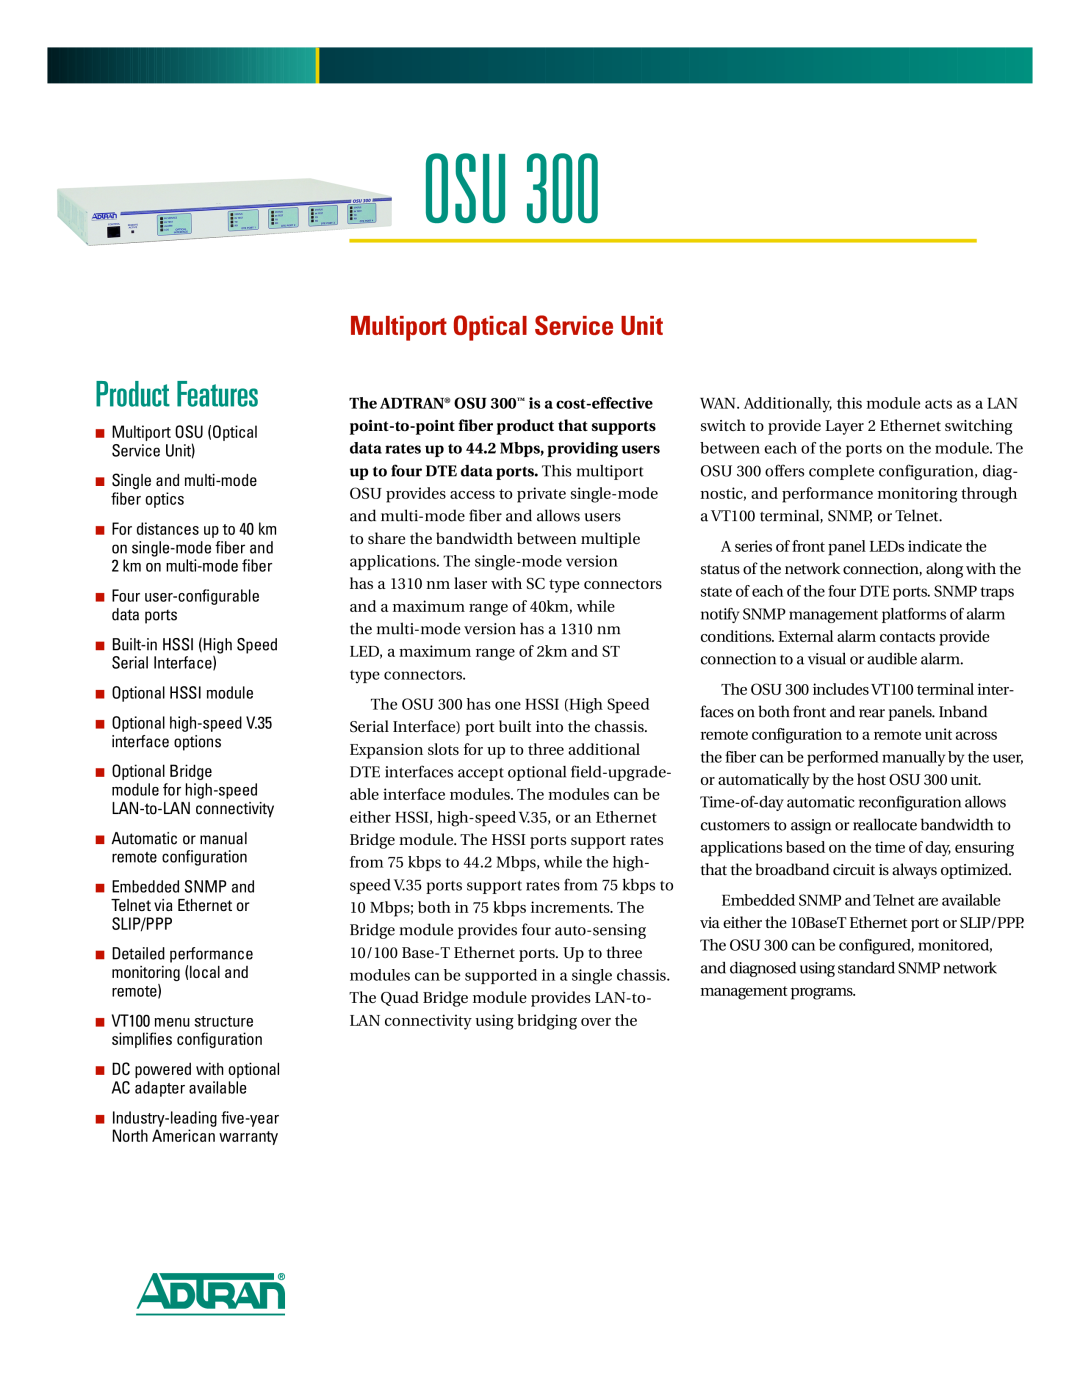 ADTRAN OSU 300 warranty Product Features, Multiport Optical Service Unit, Optional high-speed V.35 interface options 